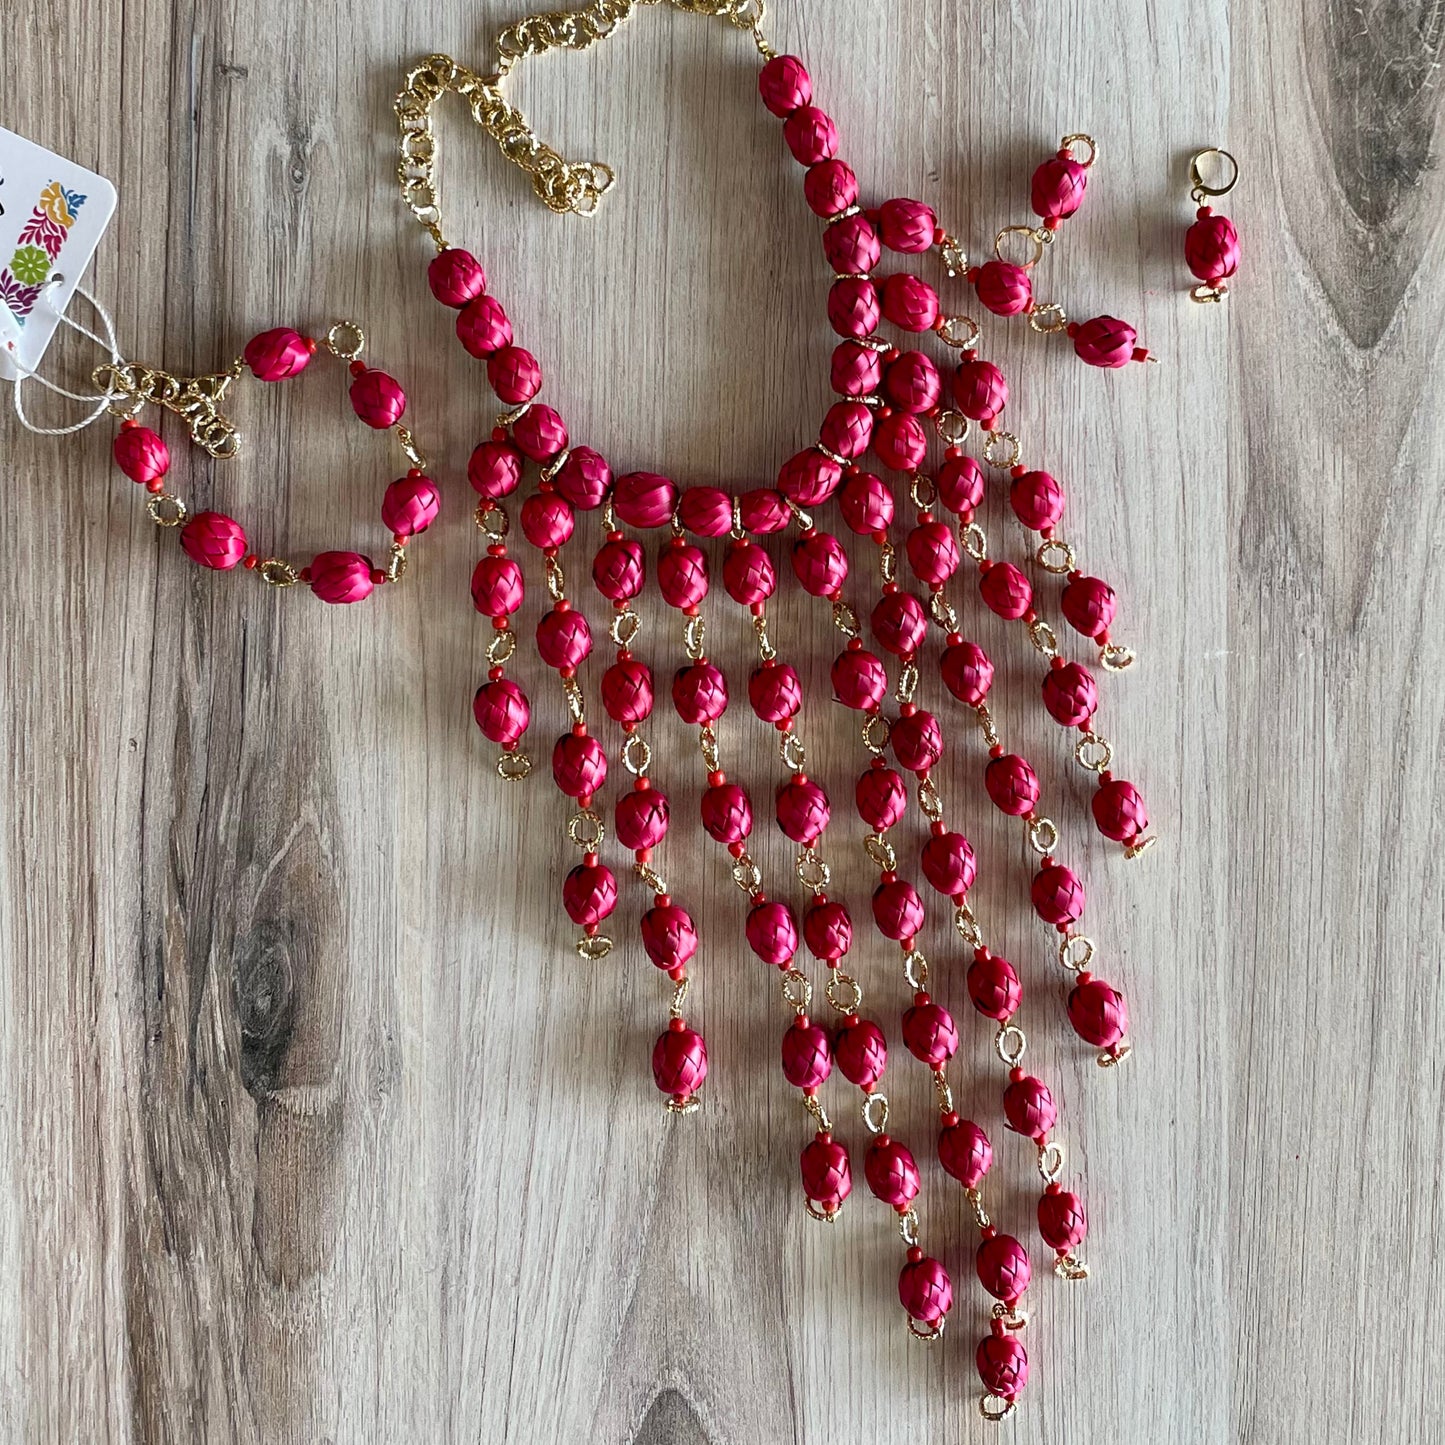 Mexican Palm Necklace Set - Fuchsia